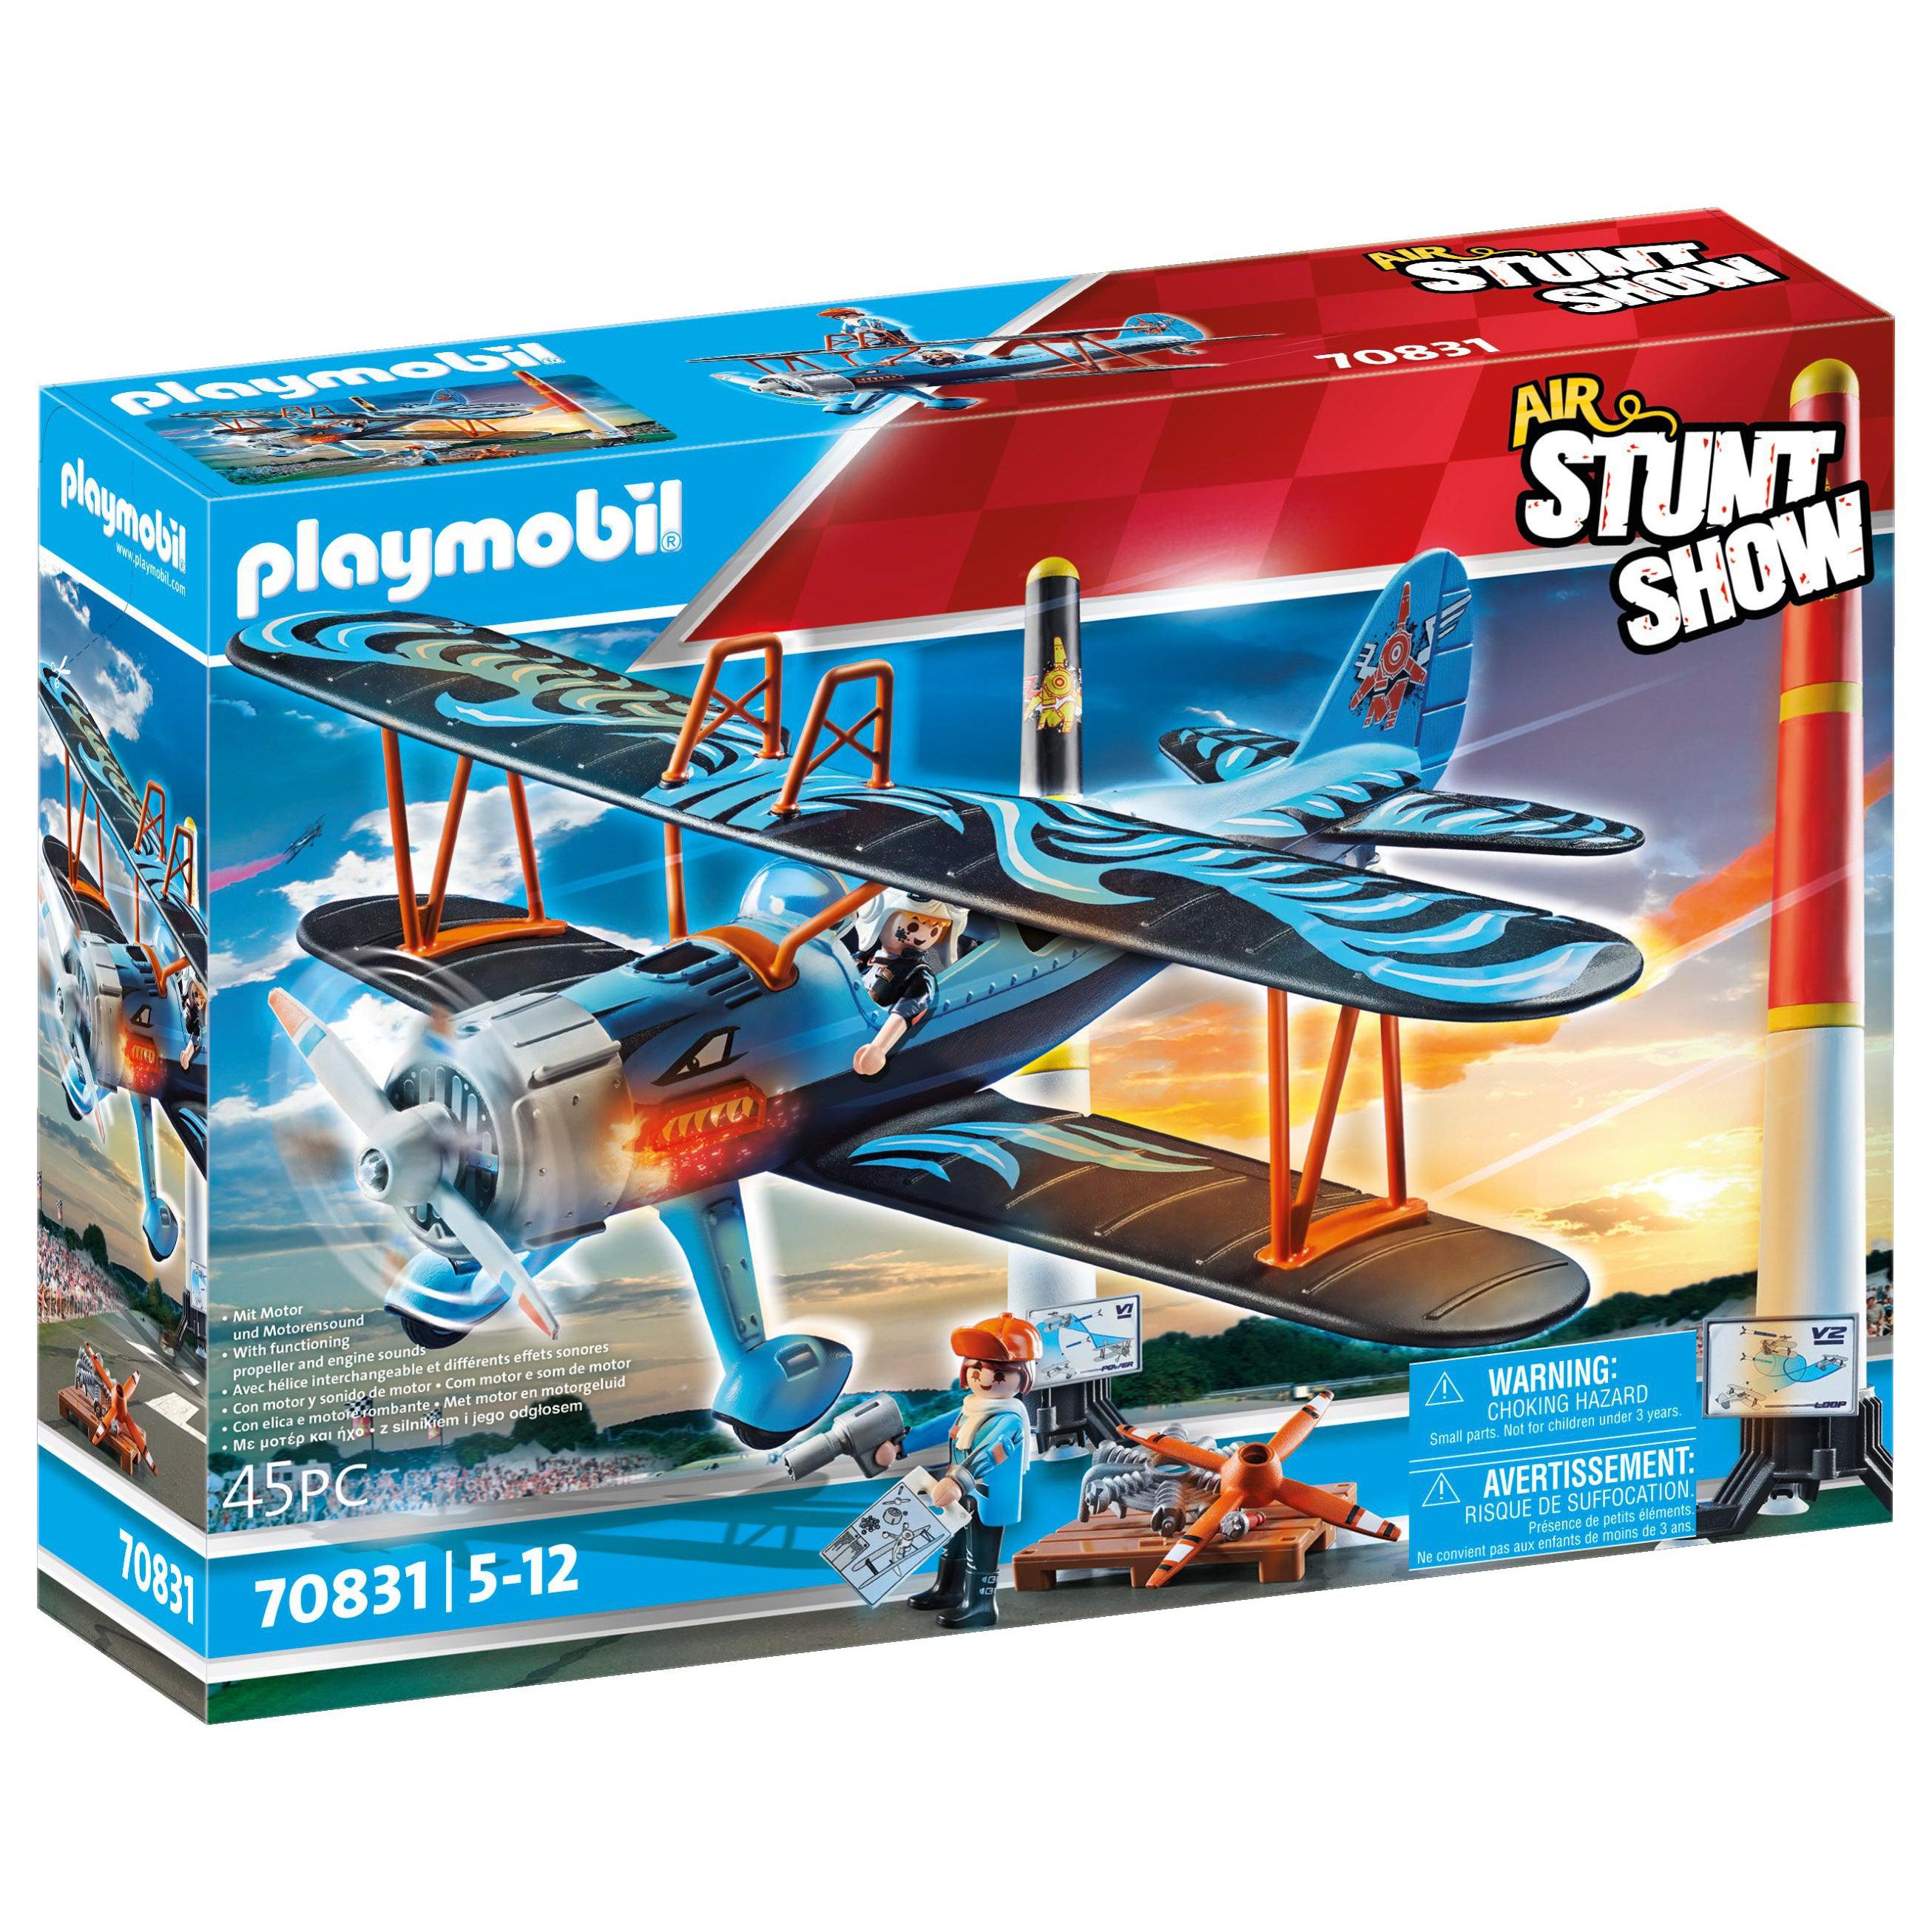 Playmobil City Action Police Jet Drone Chase - 70780